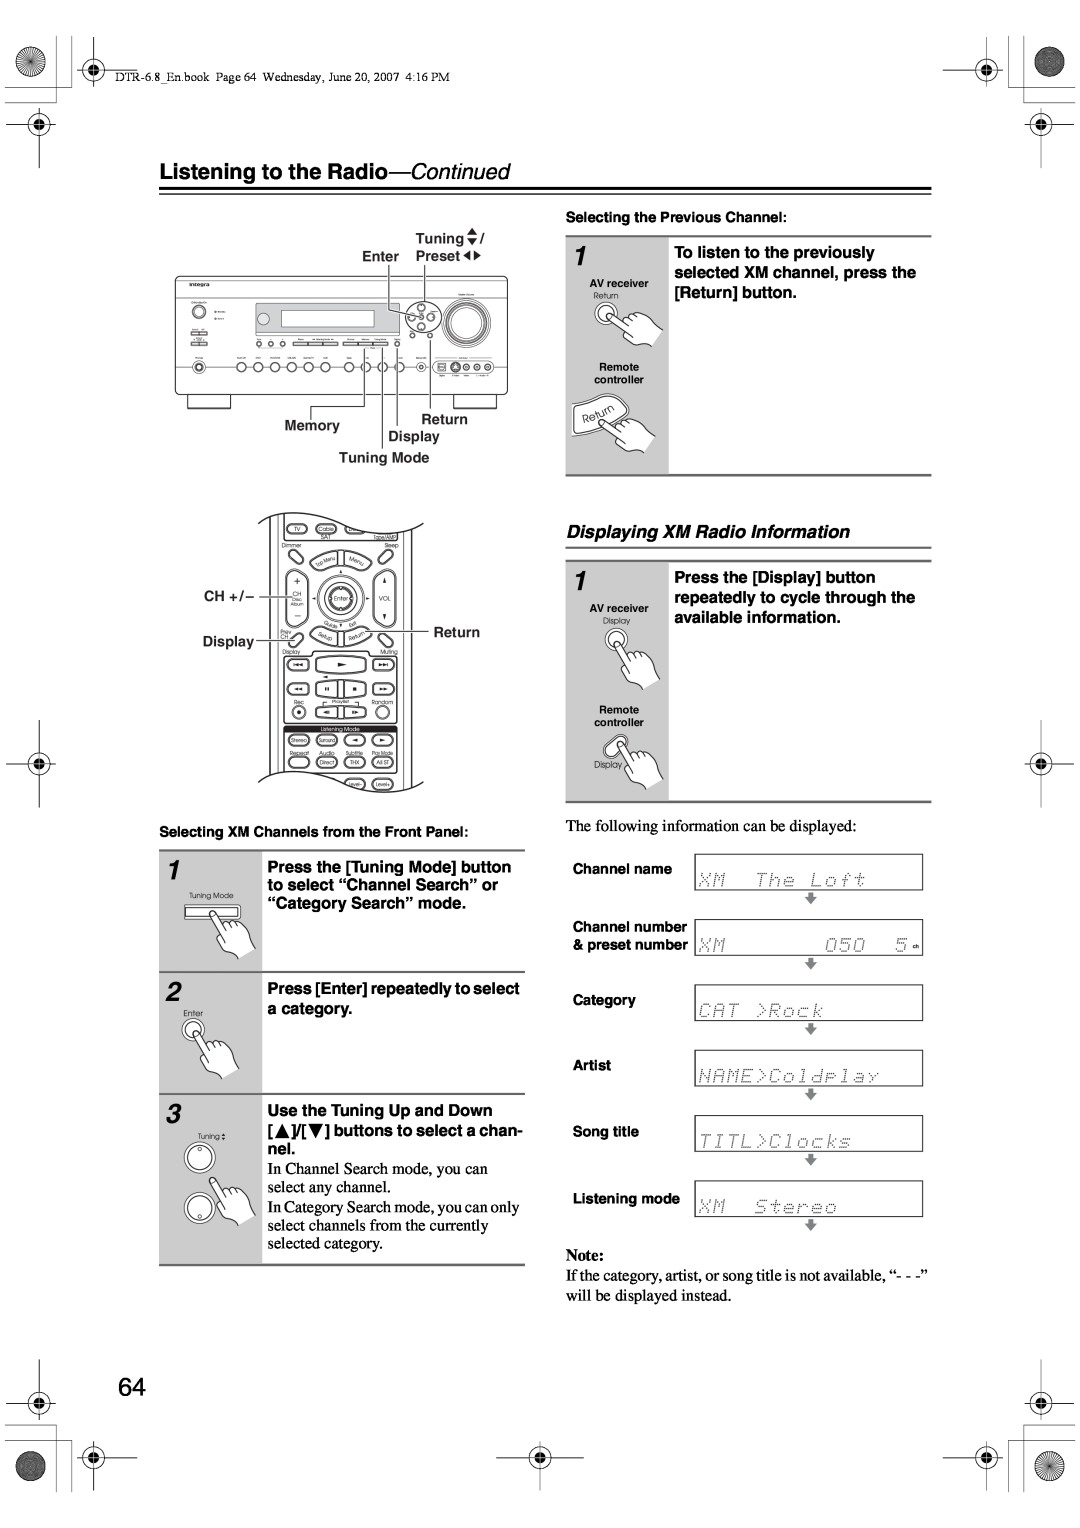 Integra DTR-6.8 instruction manual Displaying XM Radio Information, Listening to the Radio—Continued 